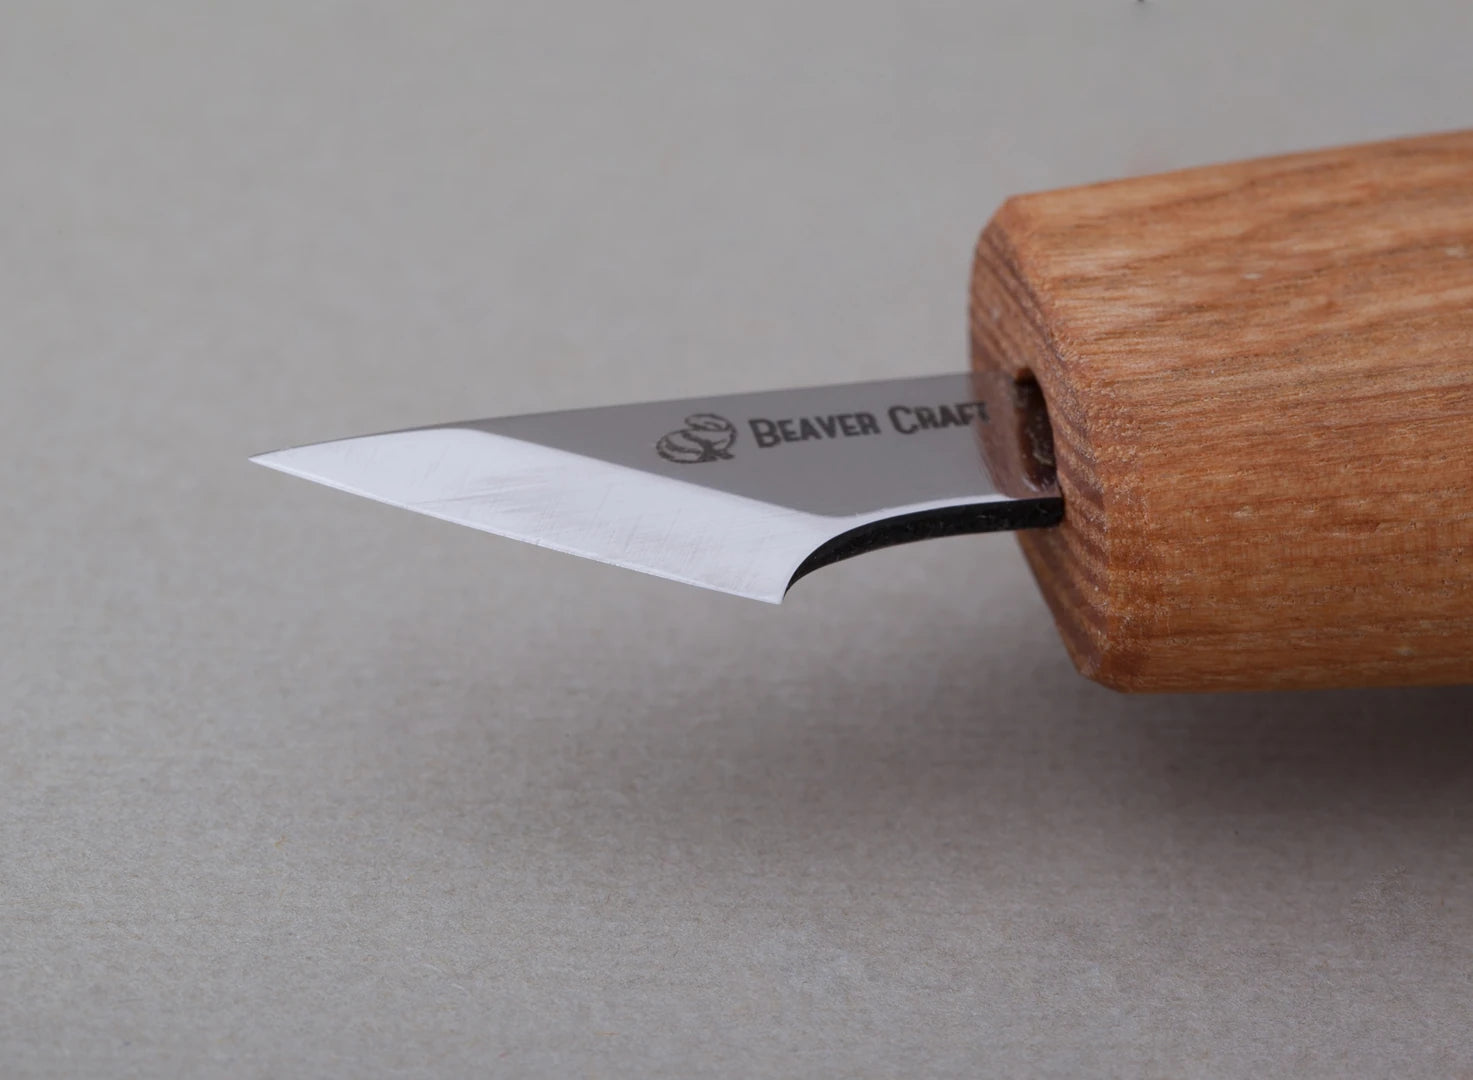 C11s - Small Knife for Chip Woodcarving